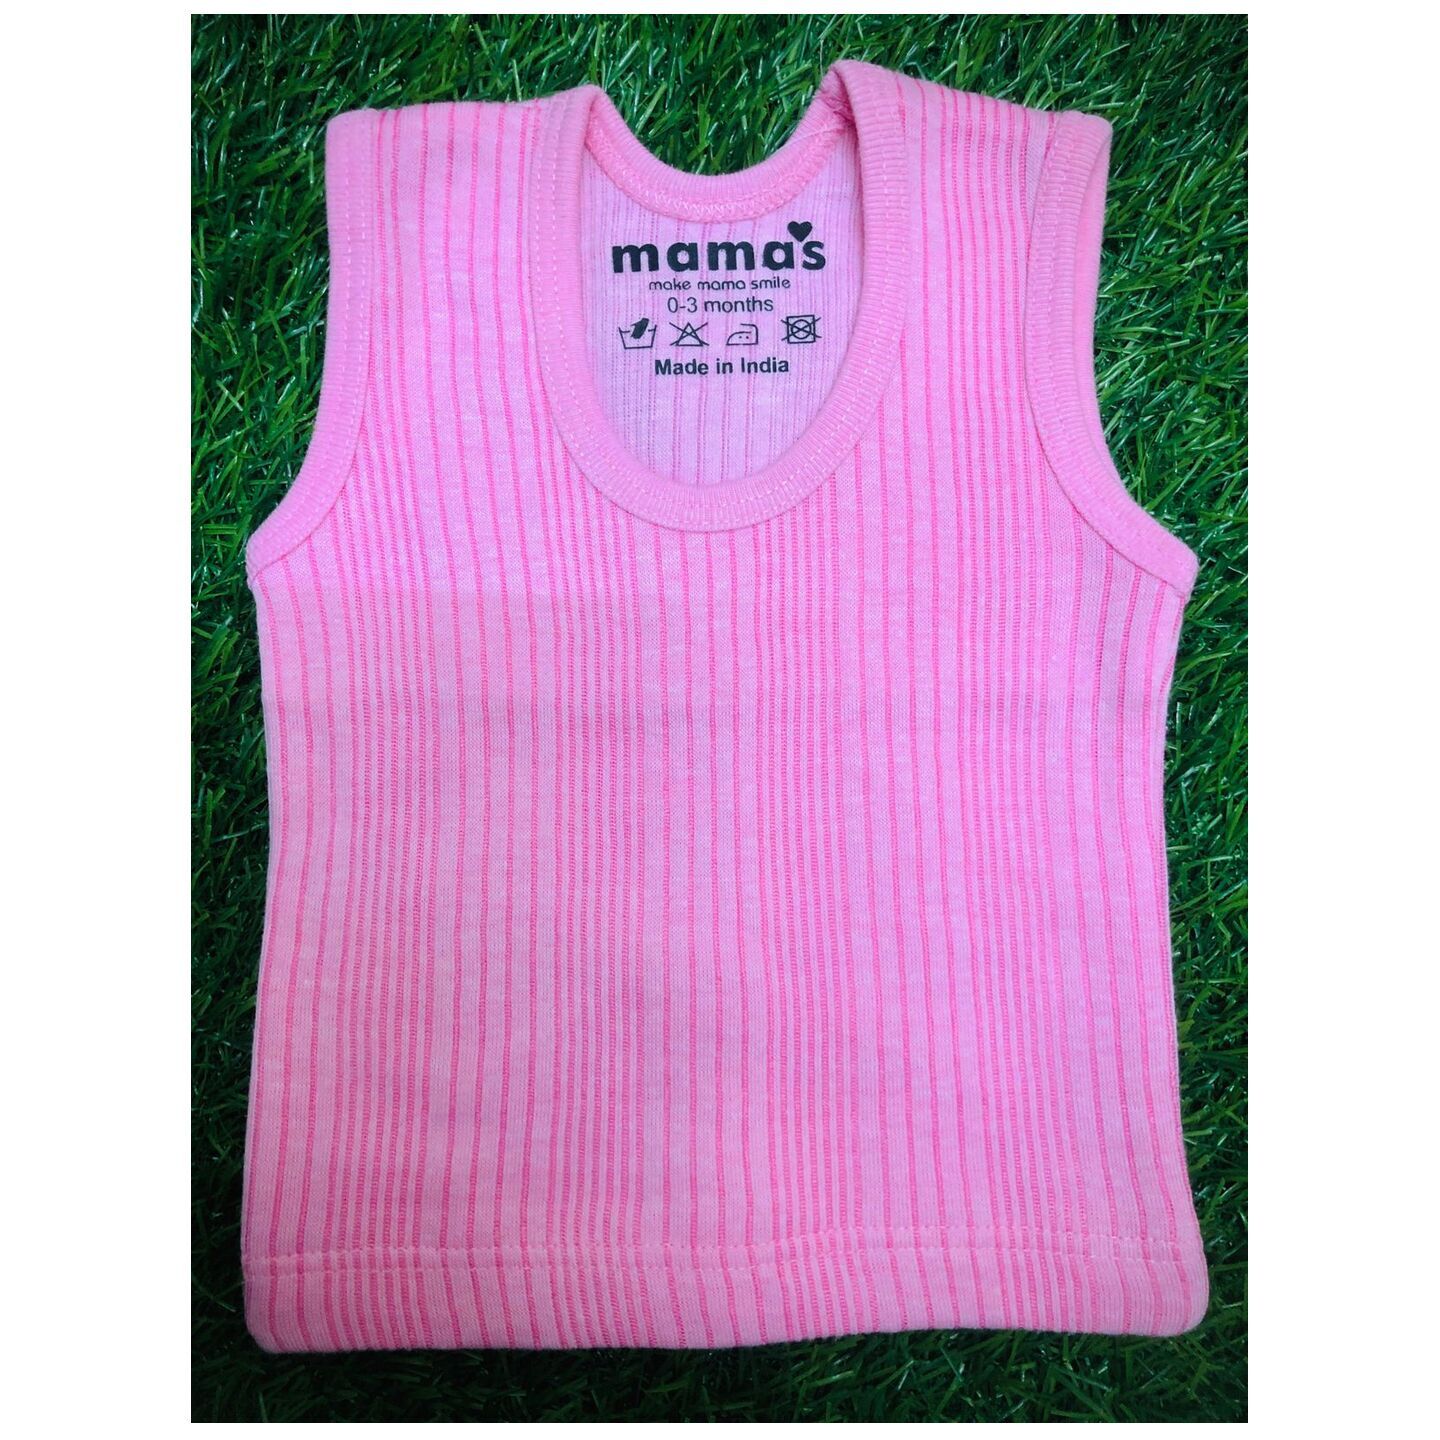 Mamas Cut Sleeves Vests NewBorn to 3 Years Pink